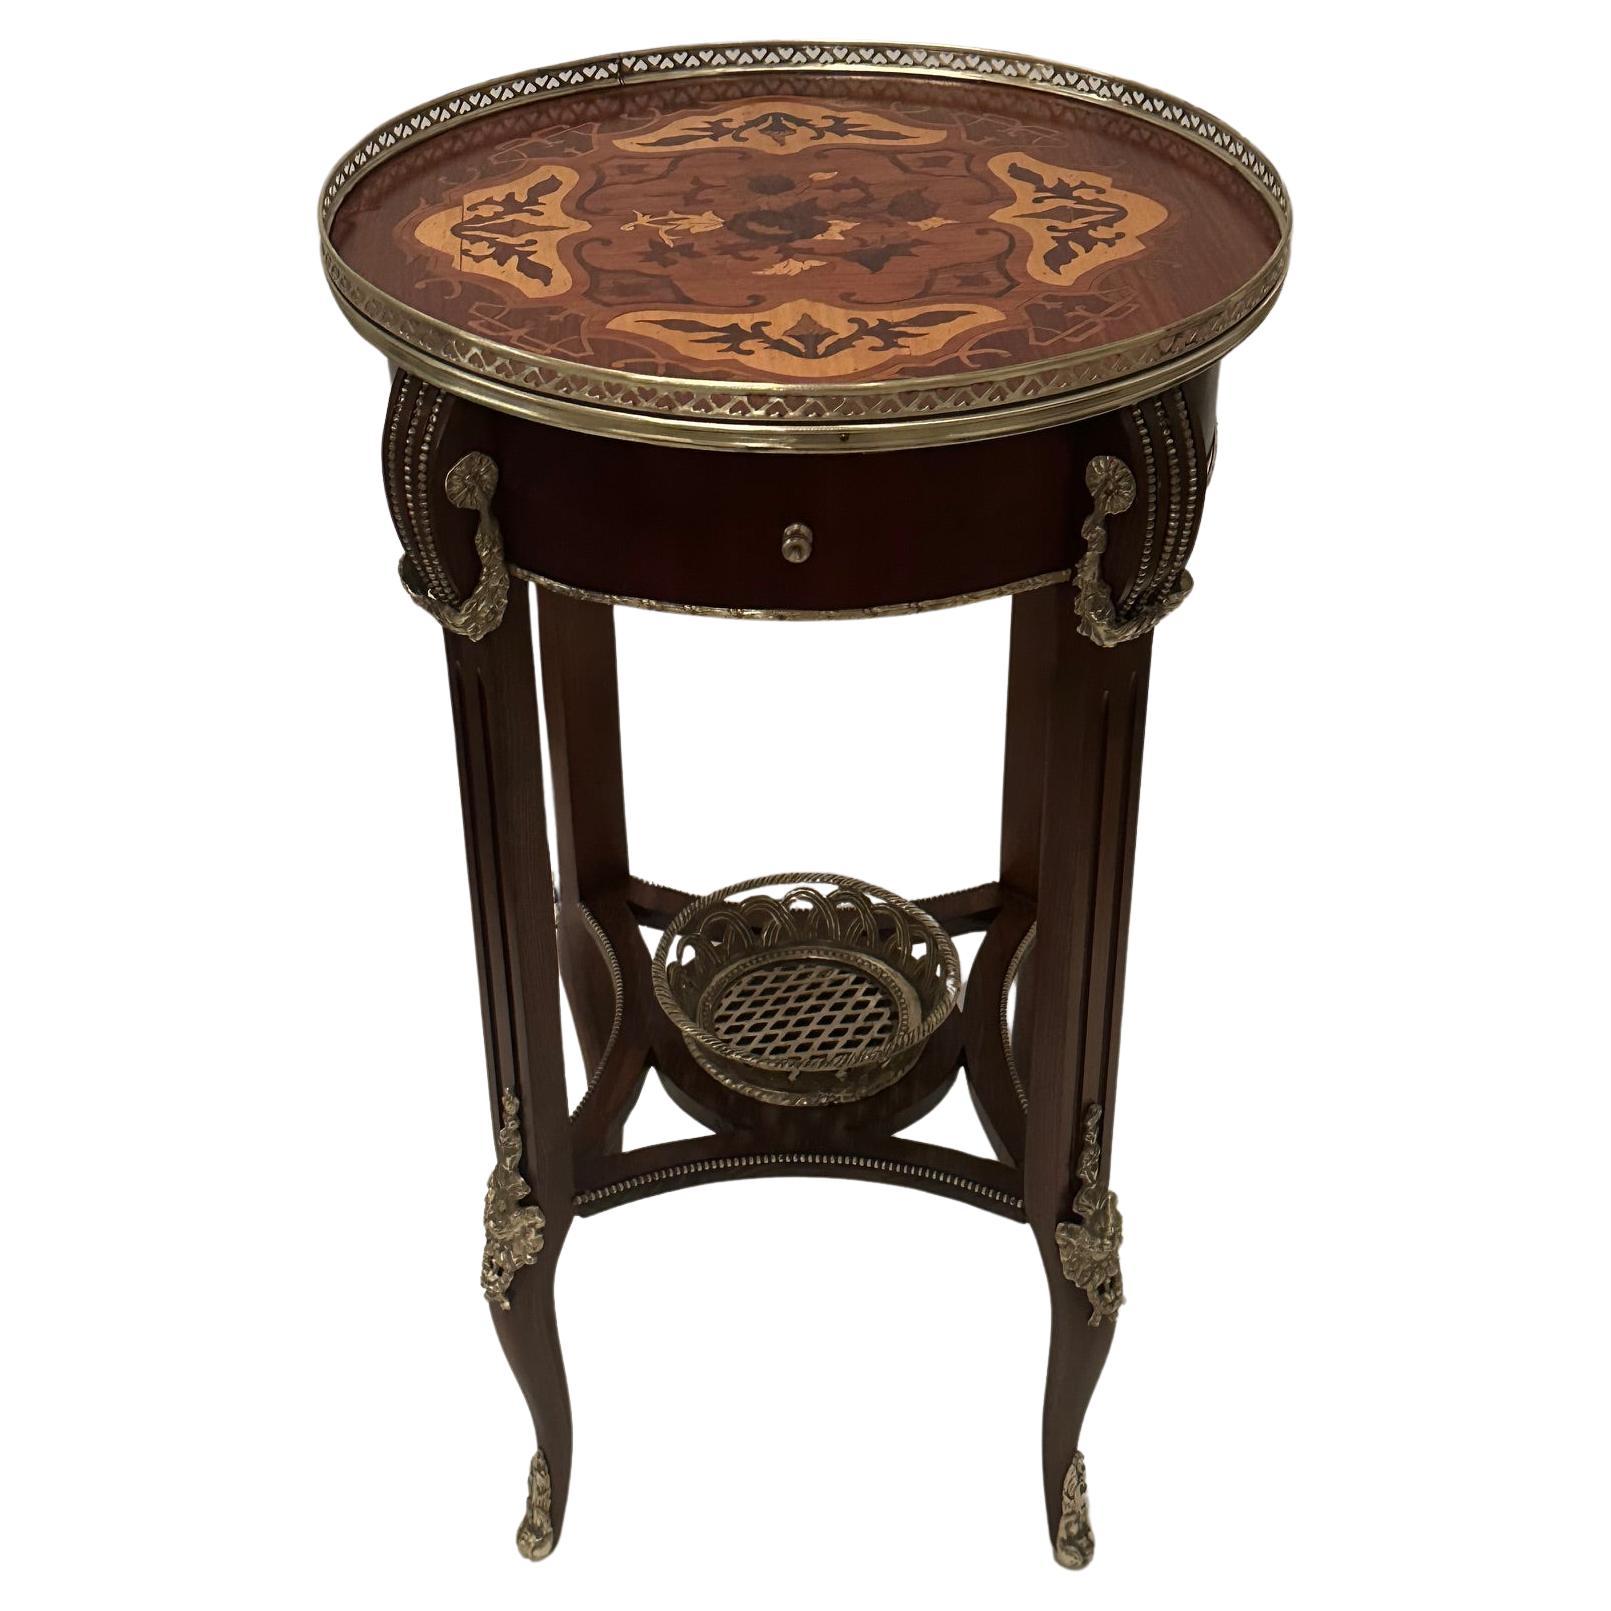 Sumptuous Round Mahogany Inlaid Side Table with Bronze Mounts